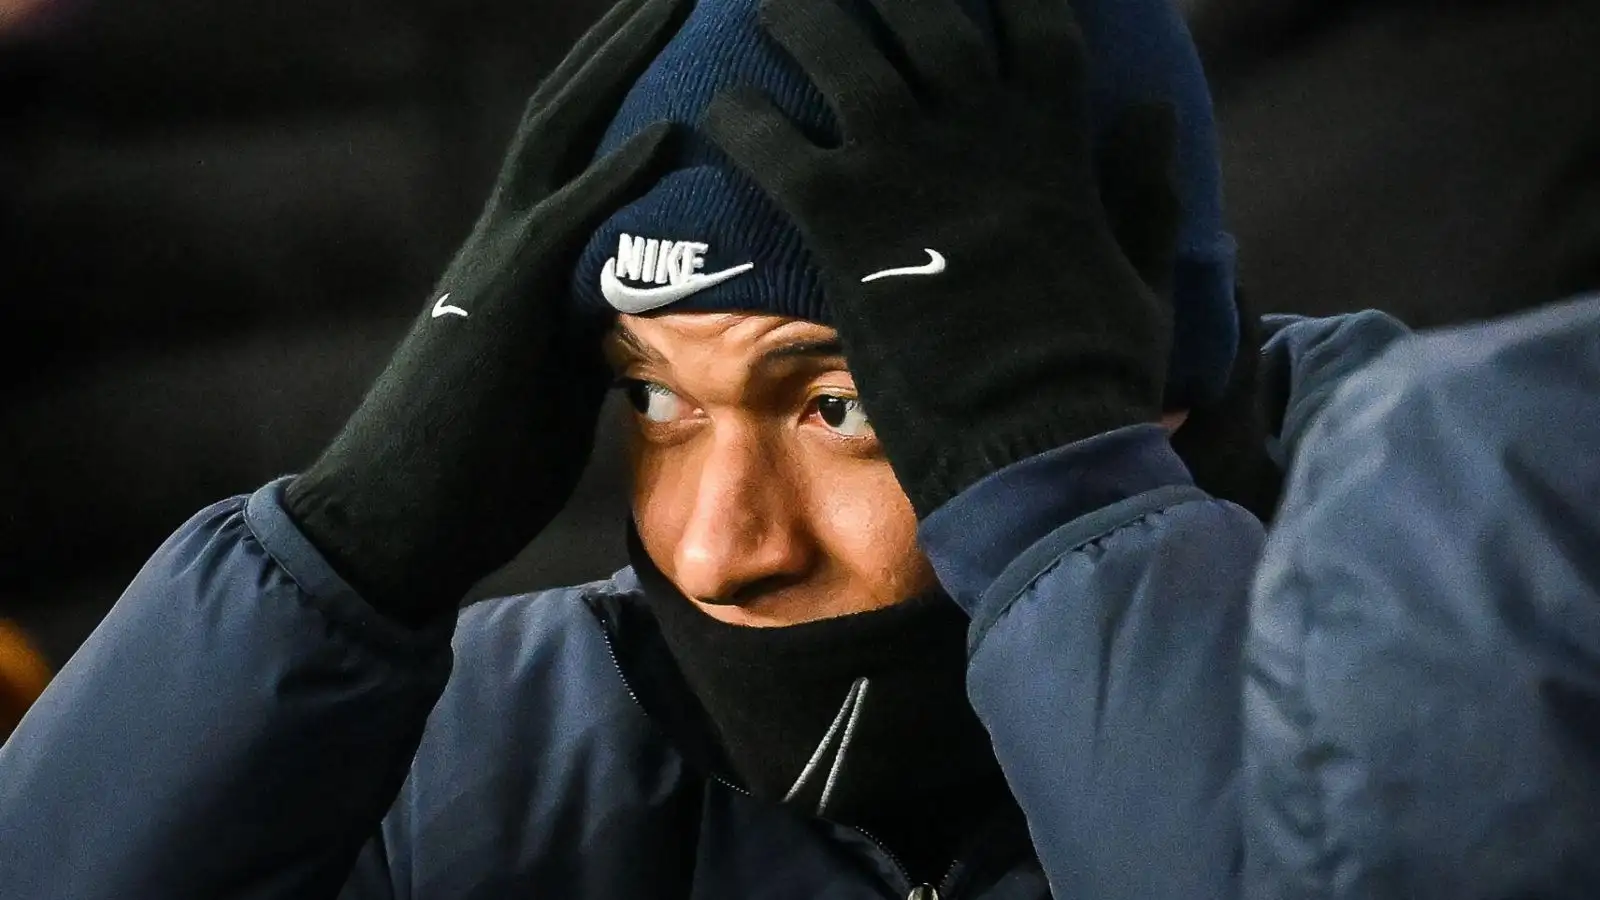 Arsenal and also Liverpool-linked PSG forward Kylian Mbappe covers upwards glowing on the bench.